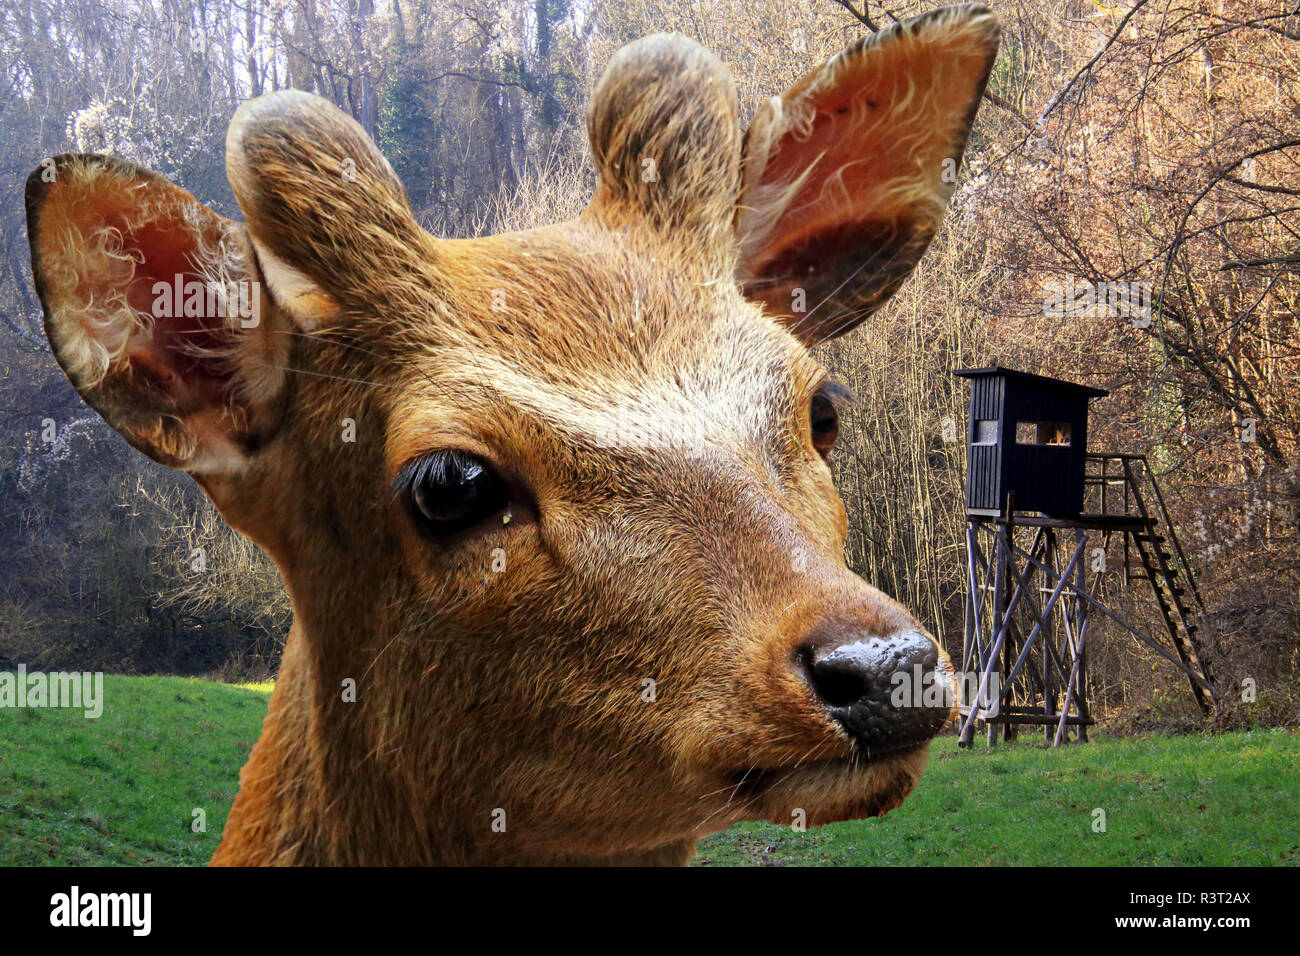 young sika deer in front of perch Stock Photo